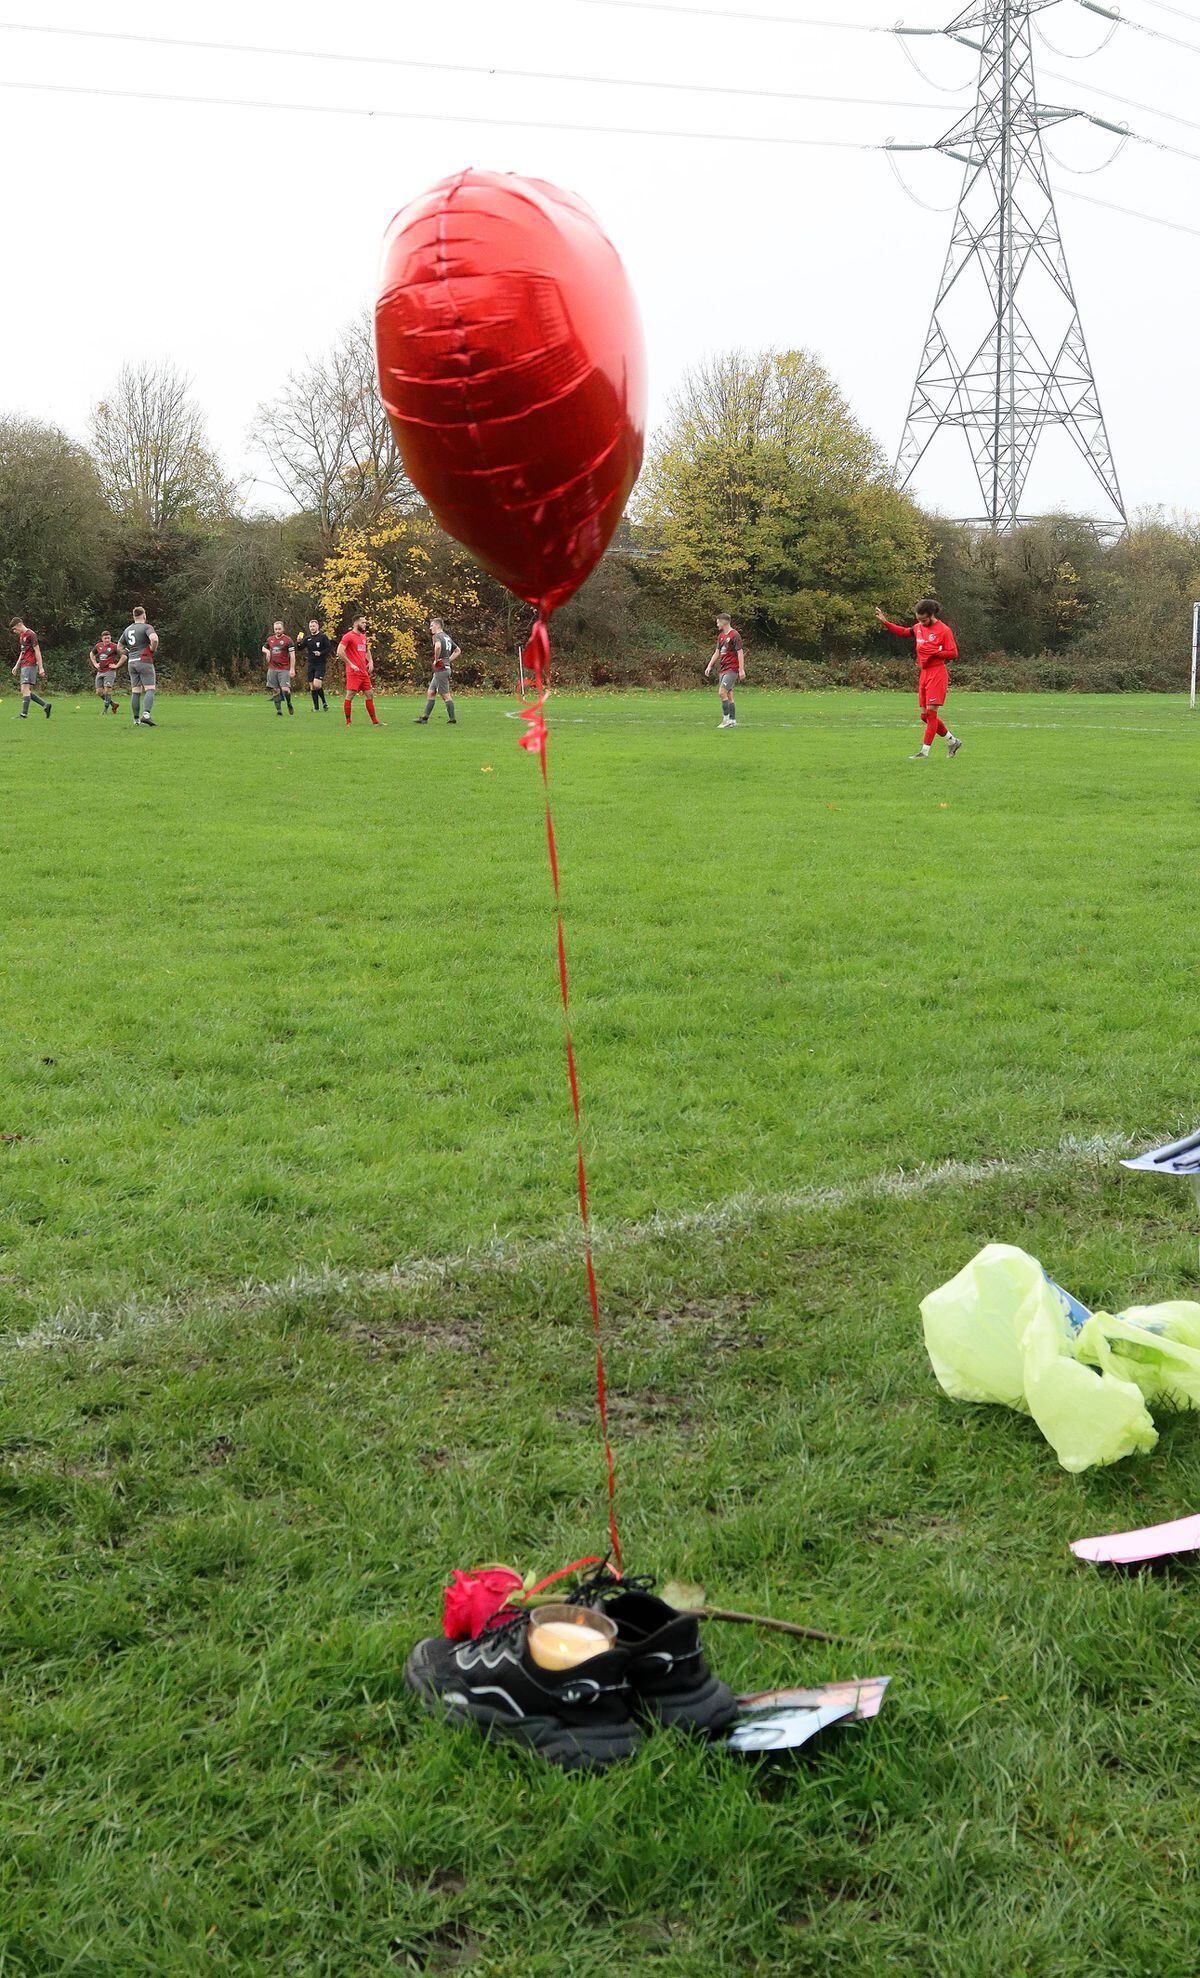 A red balloon was tied to a pair of Liberty's trainers as a tribute during the game